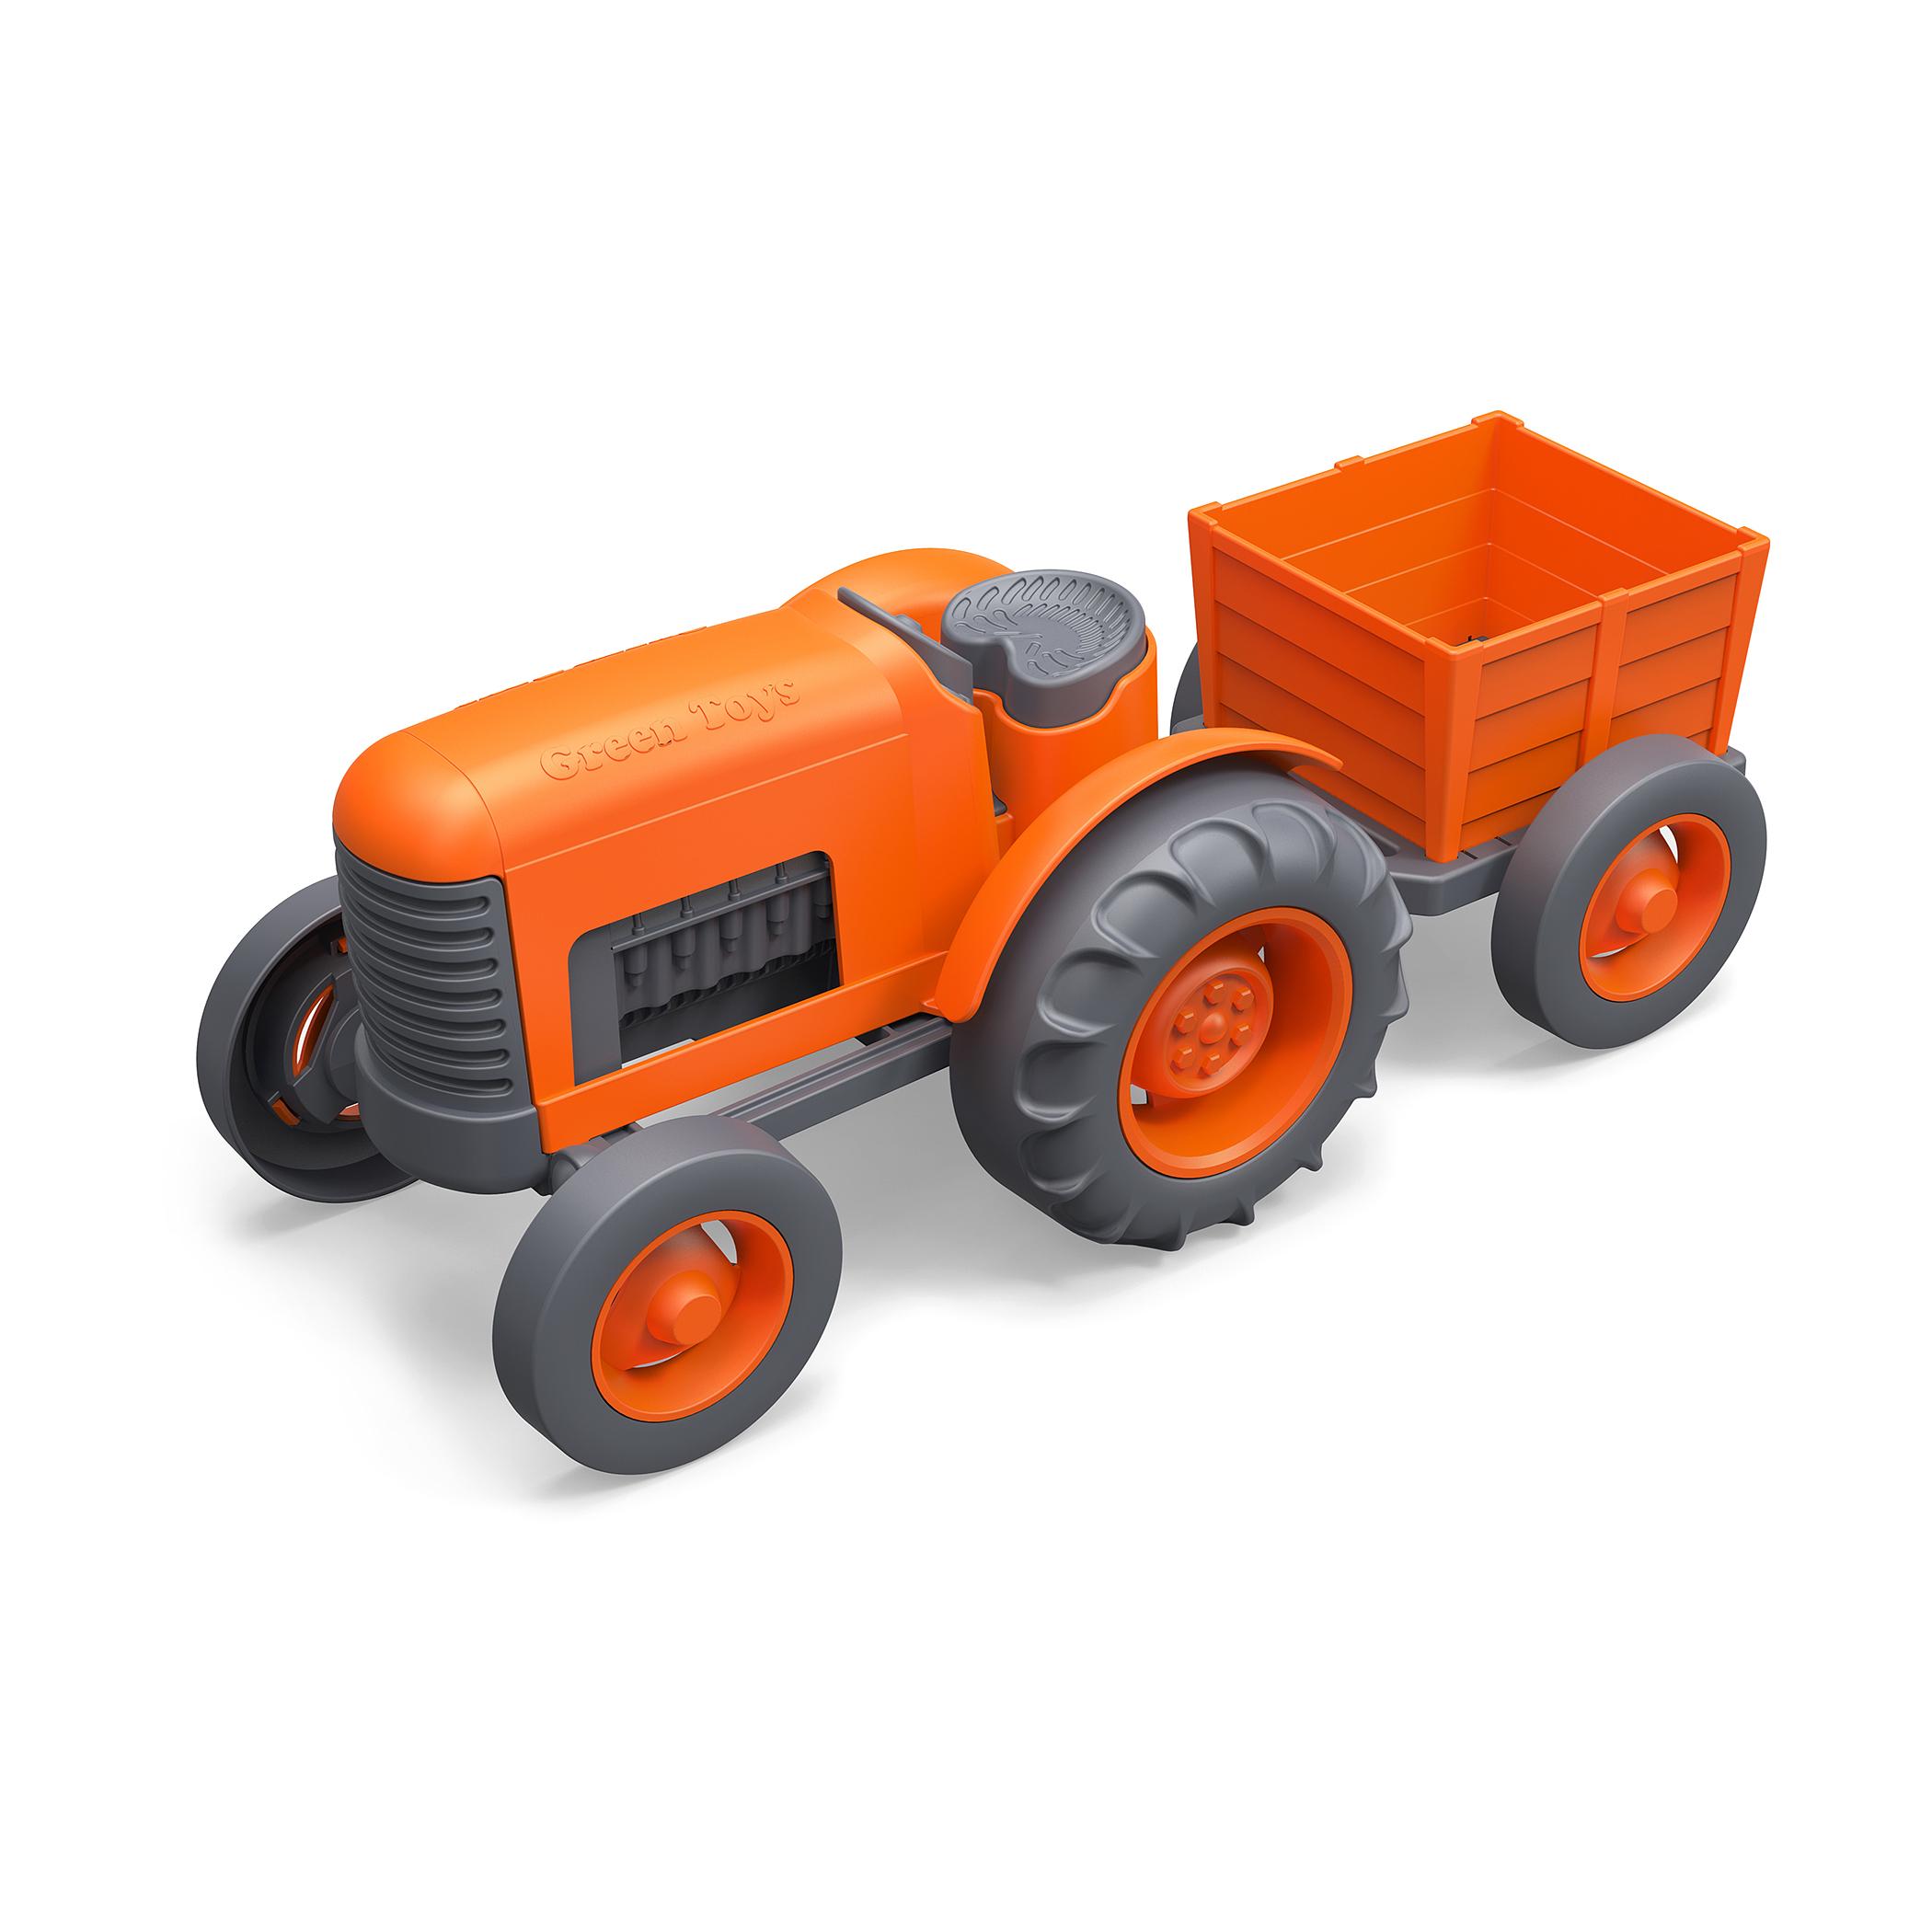  Recycled Plastic Tractor & Orange Cart Toy